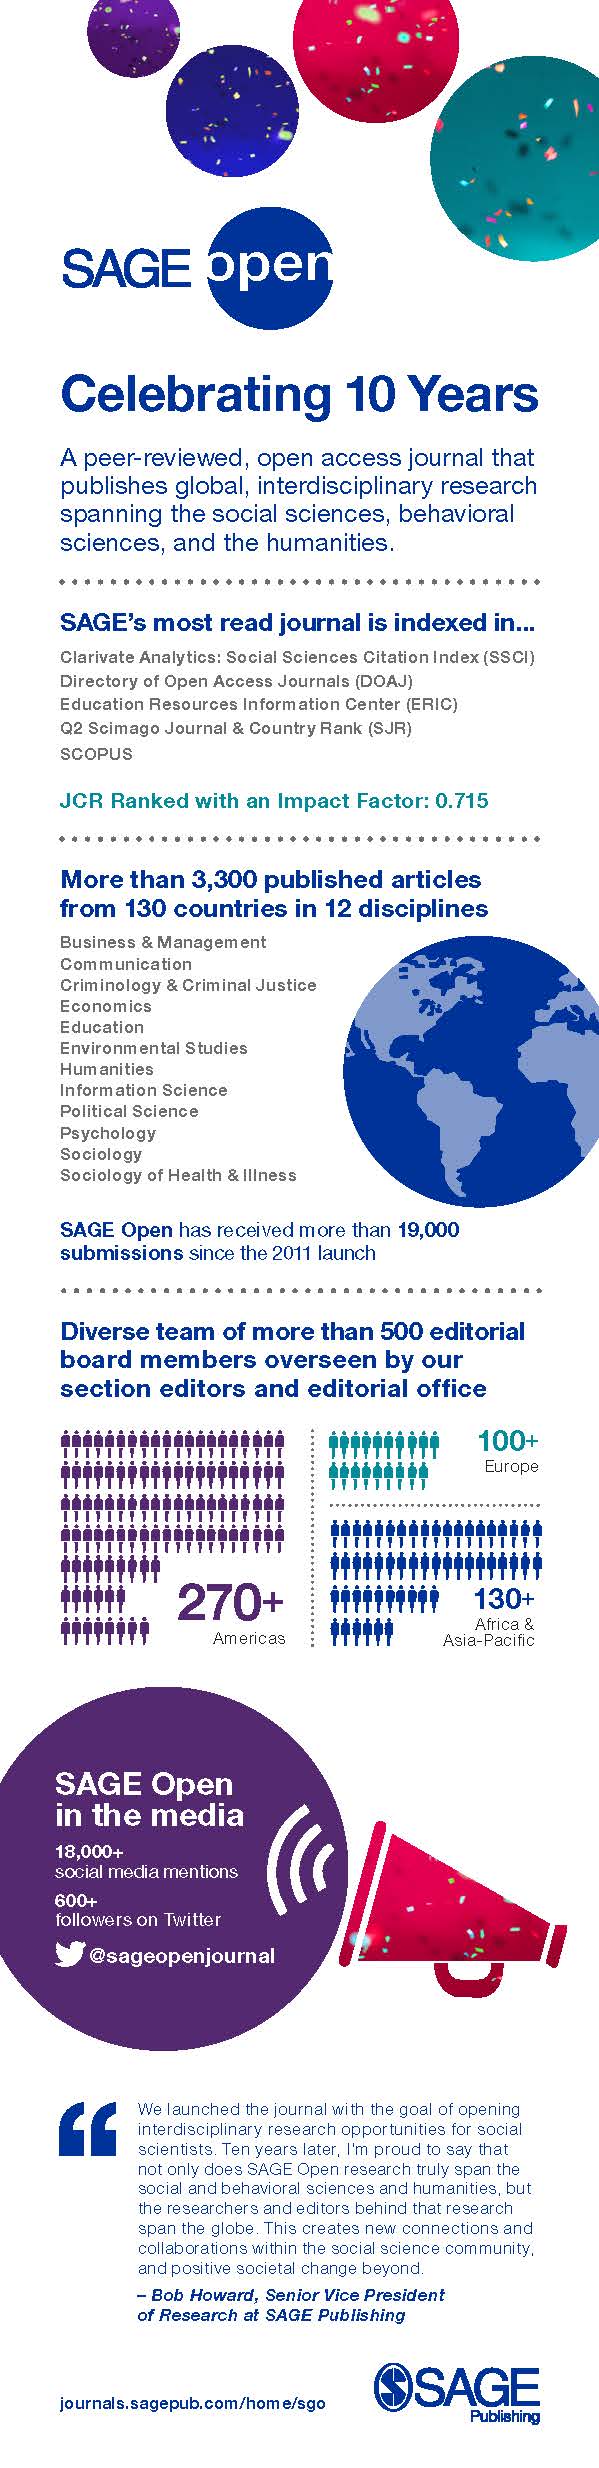 SAGE Open infographic